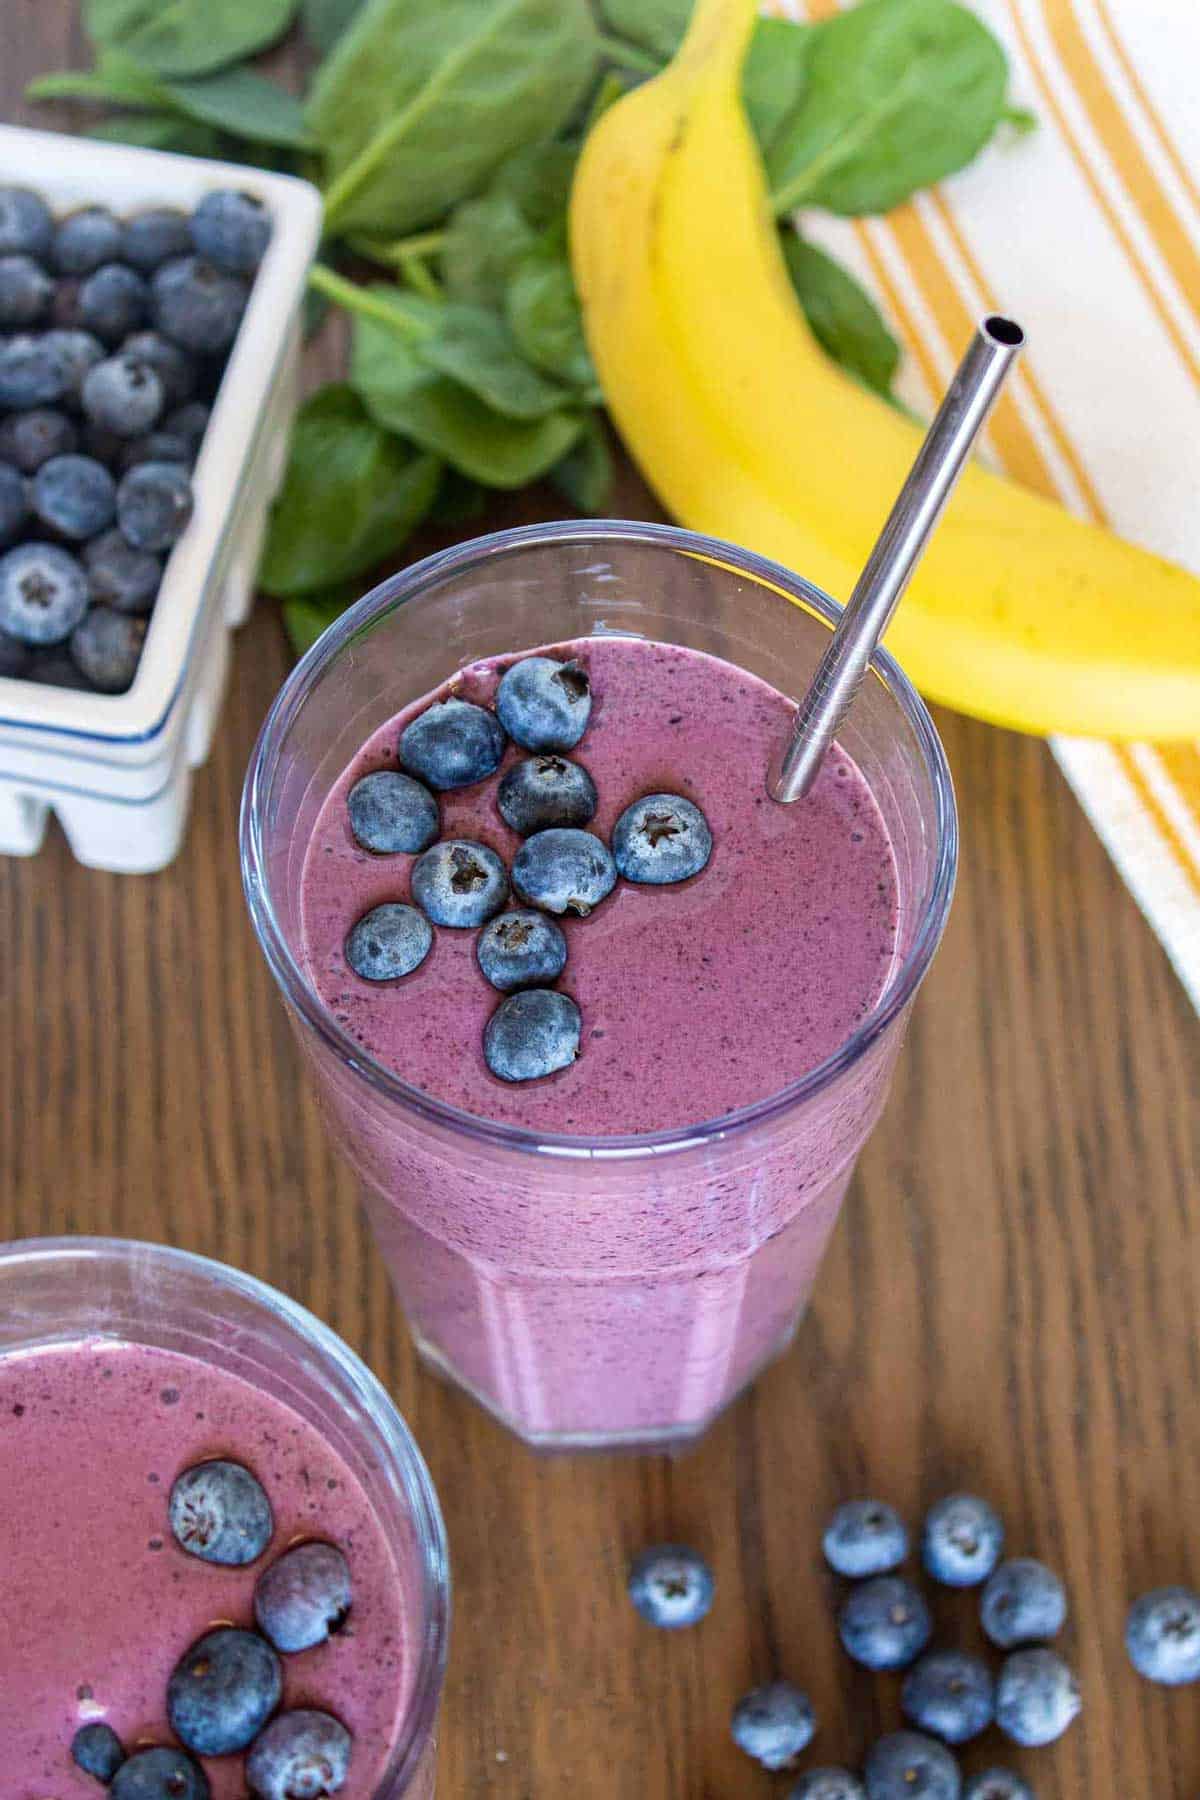 Blueberry banana spinach smoothie garnished with fresh blueberries